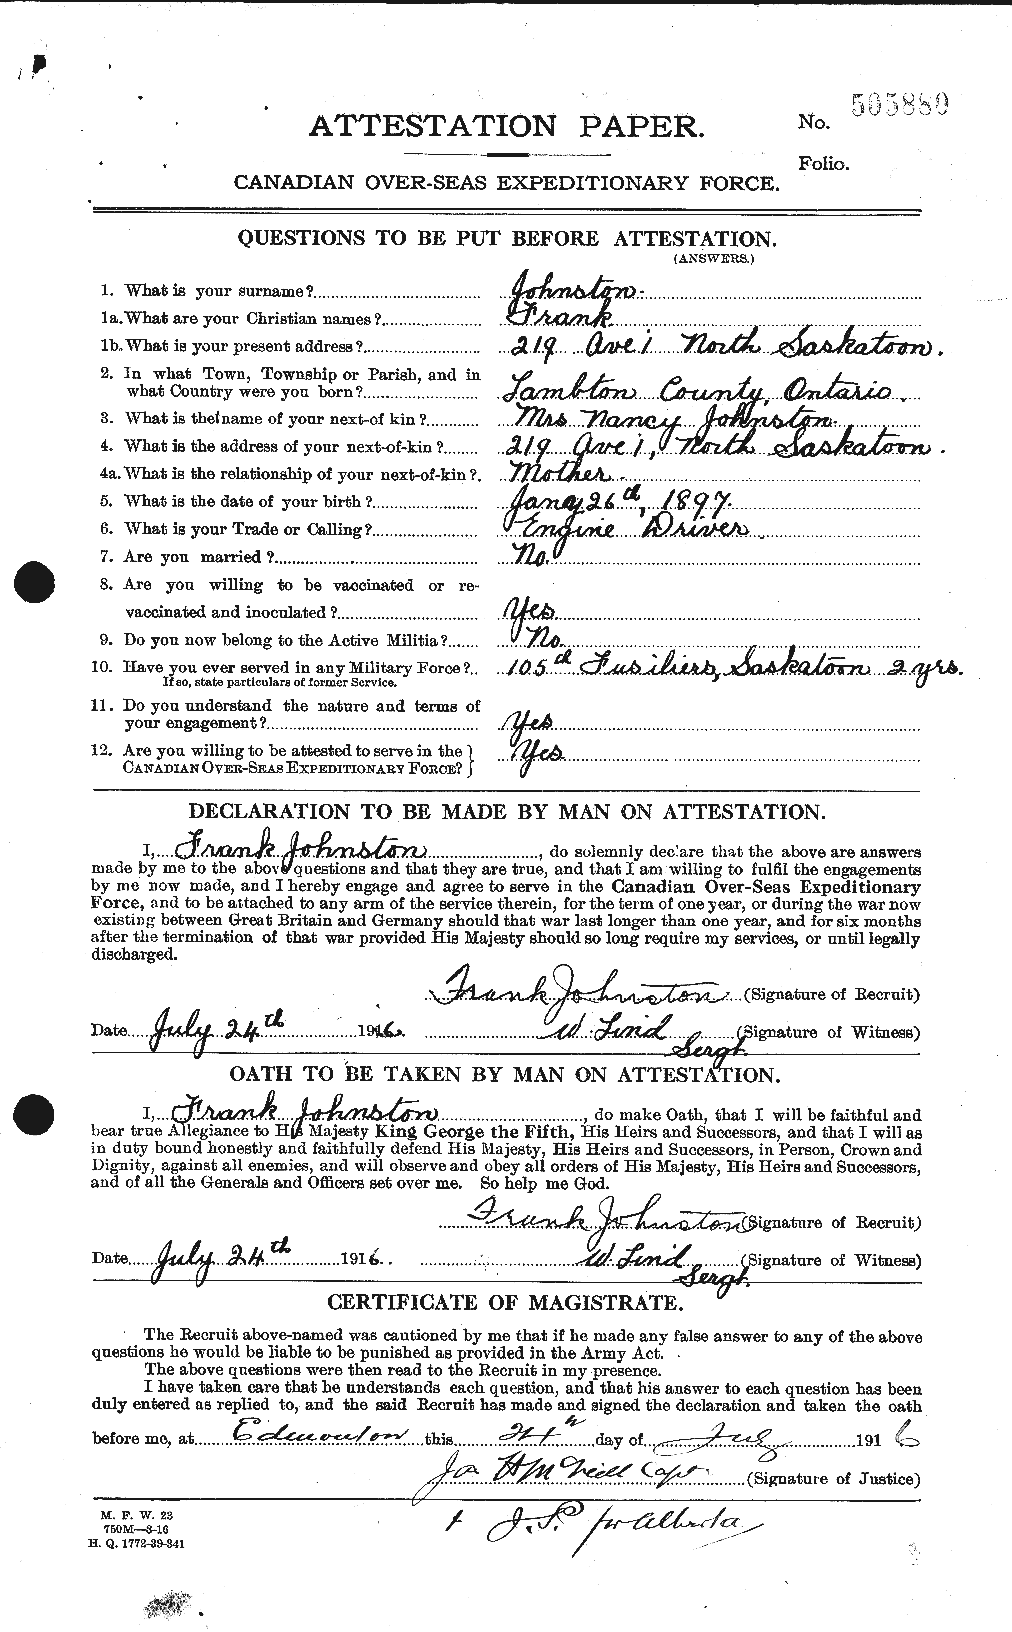 Personnel Records of the First World War - CEF 423273a